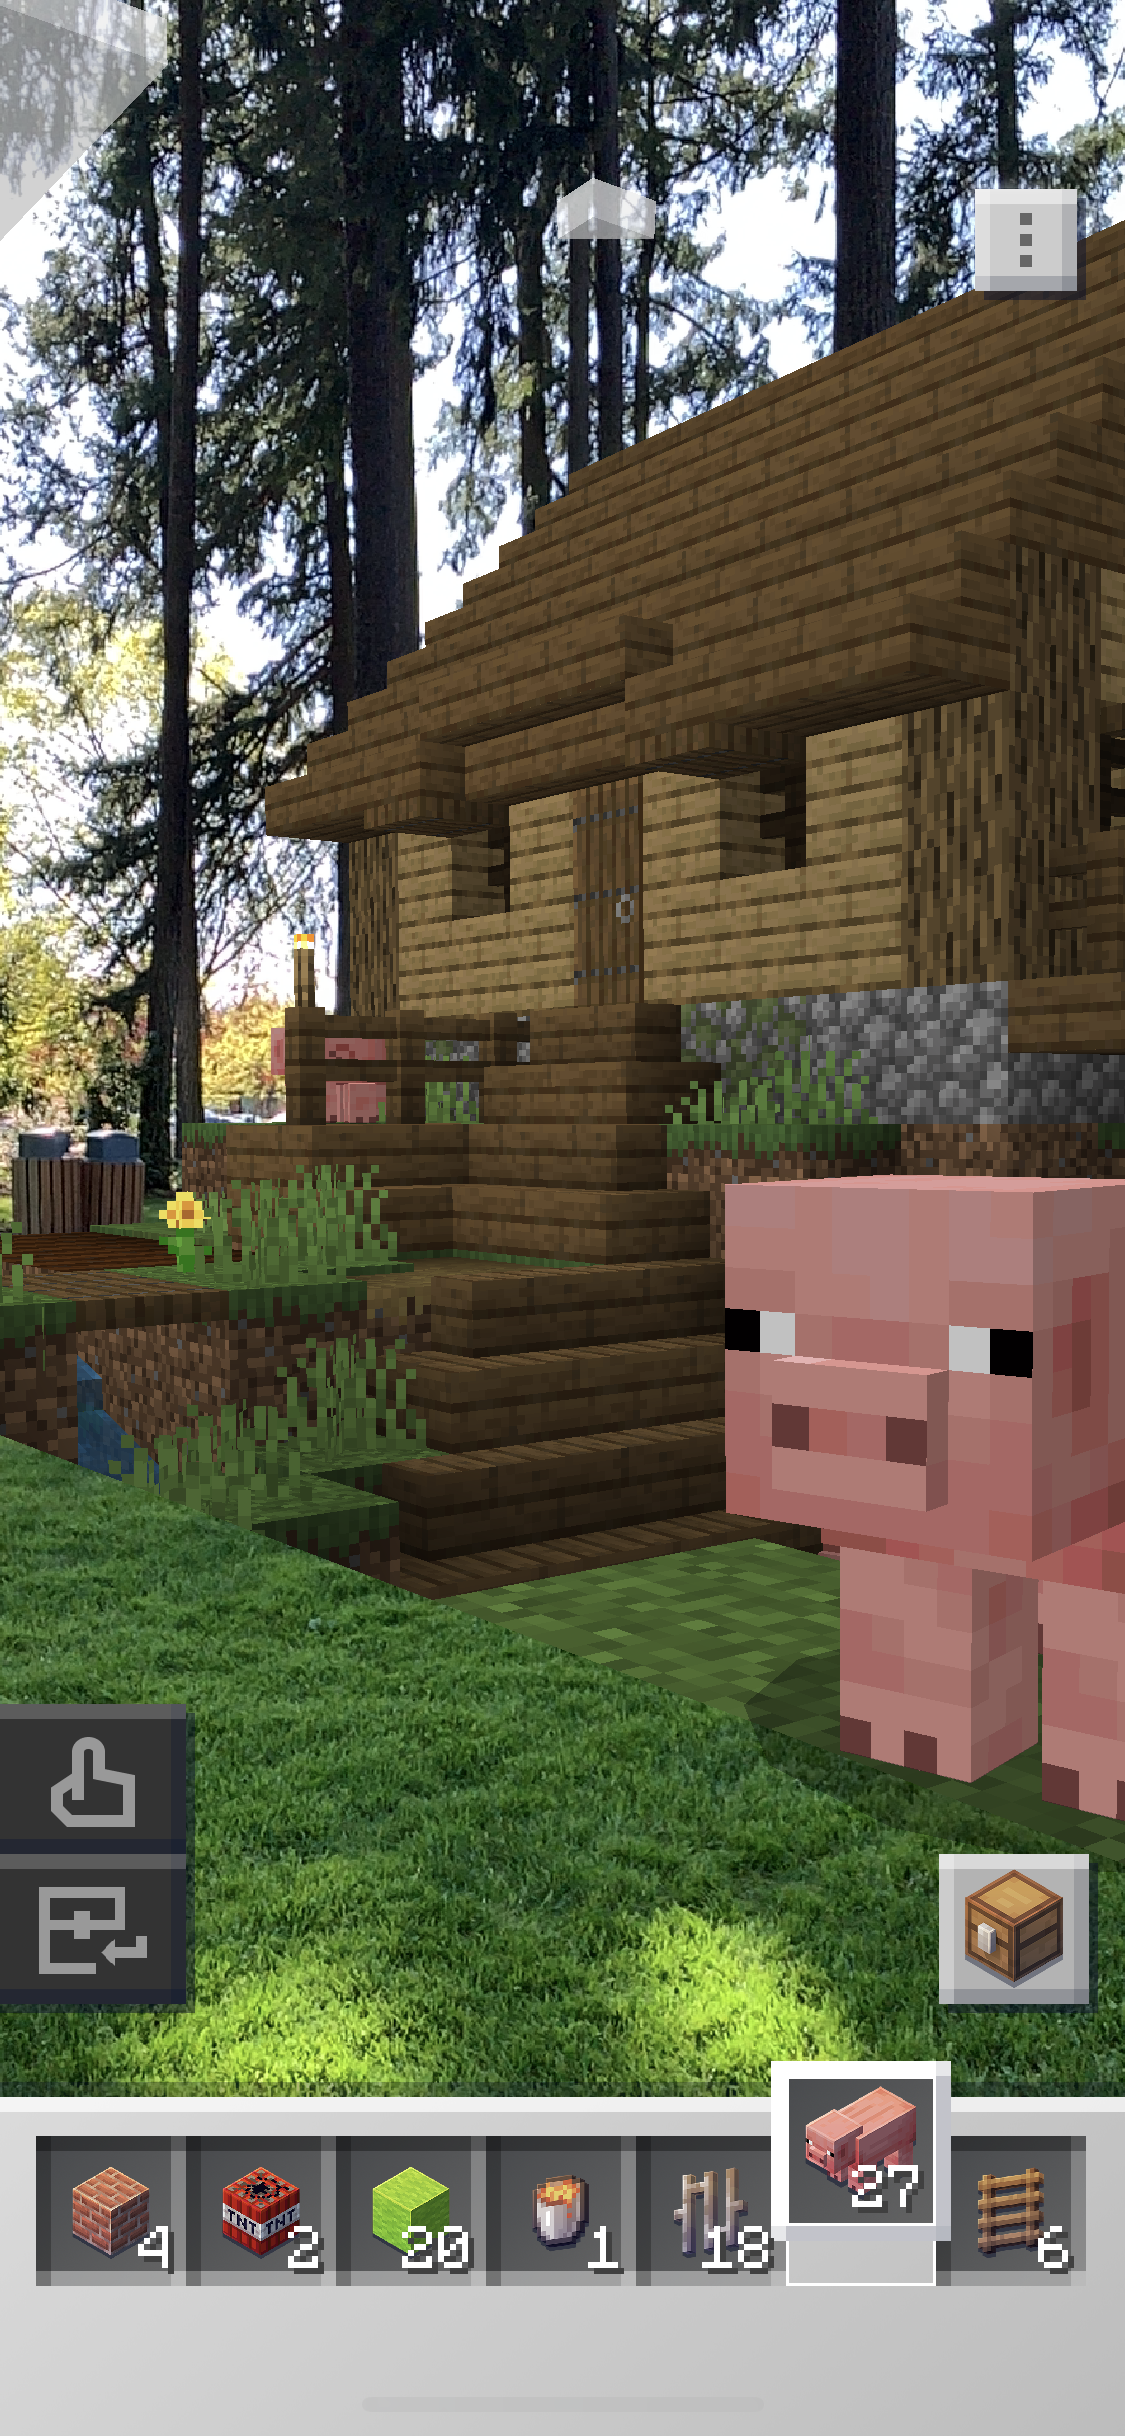 Minecraft Earth goes live in preview for the entire United States